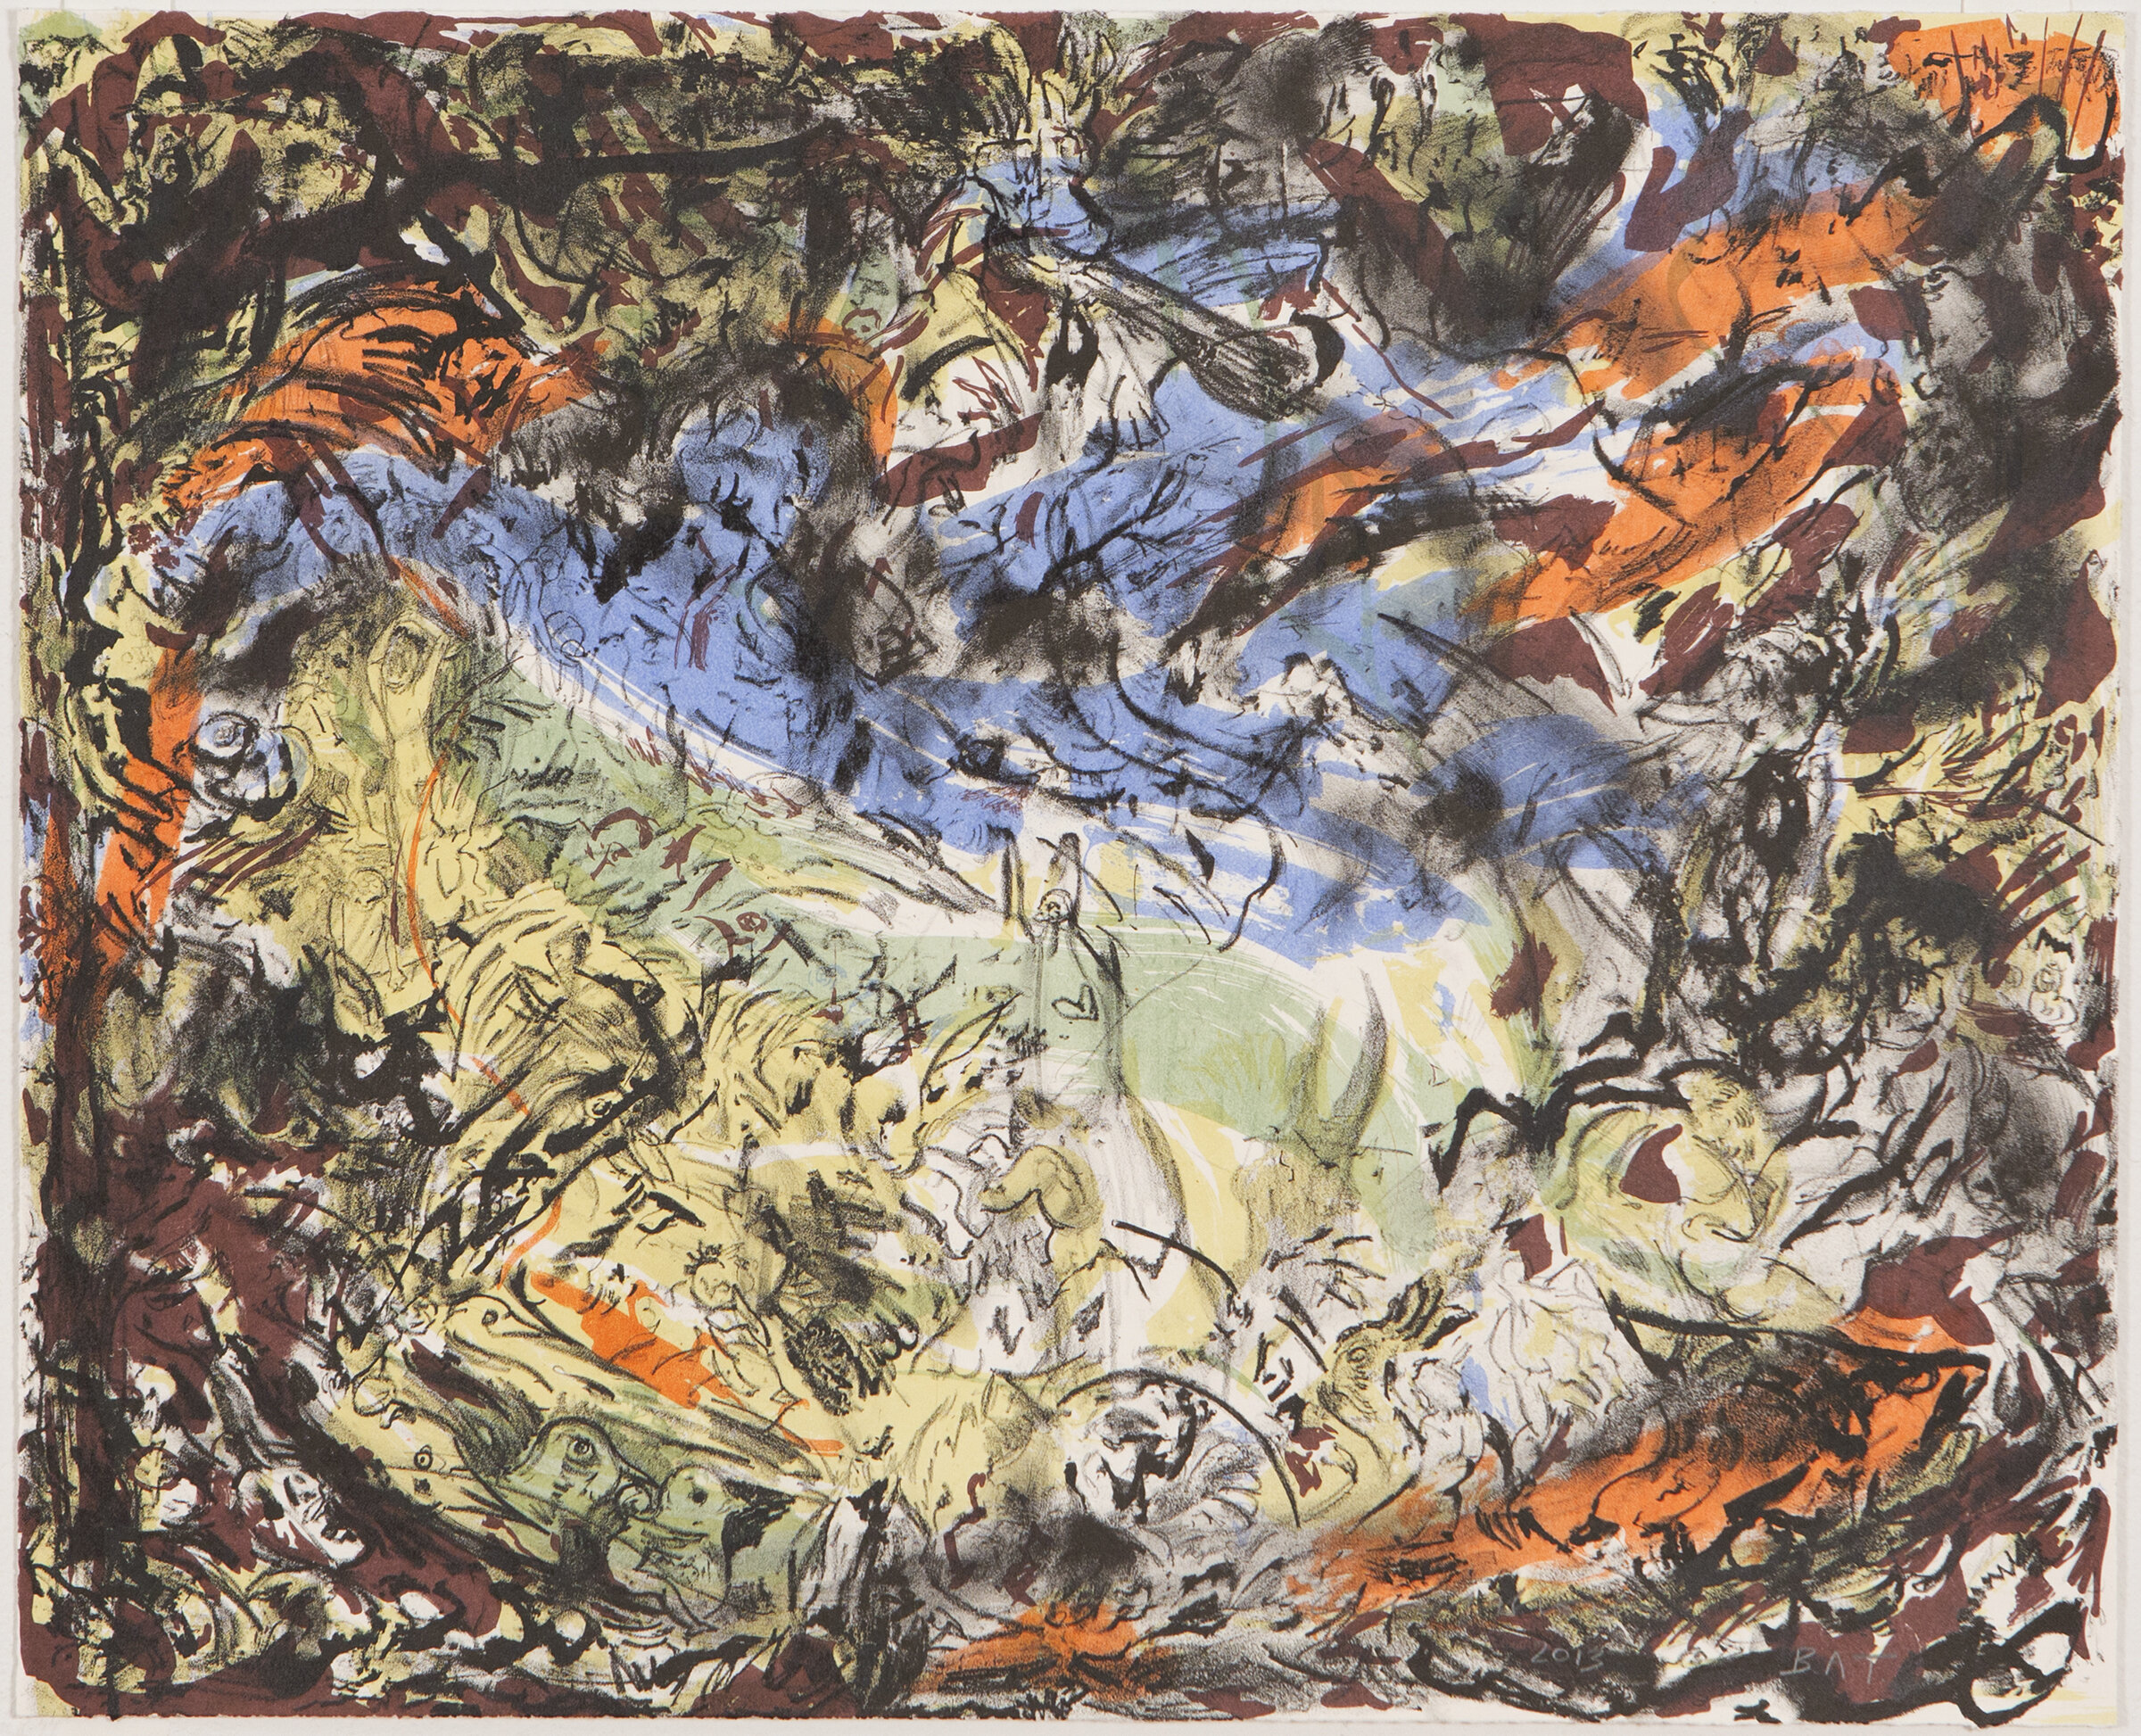   Cecily Brown   What the Shepherd Saw , 2013 Stone and offset lithograph 15 1/2 x 19 inches Edition of 44 